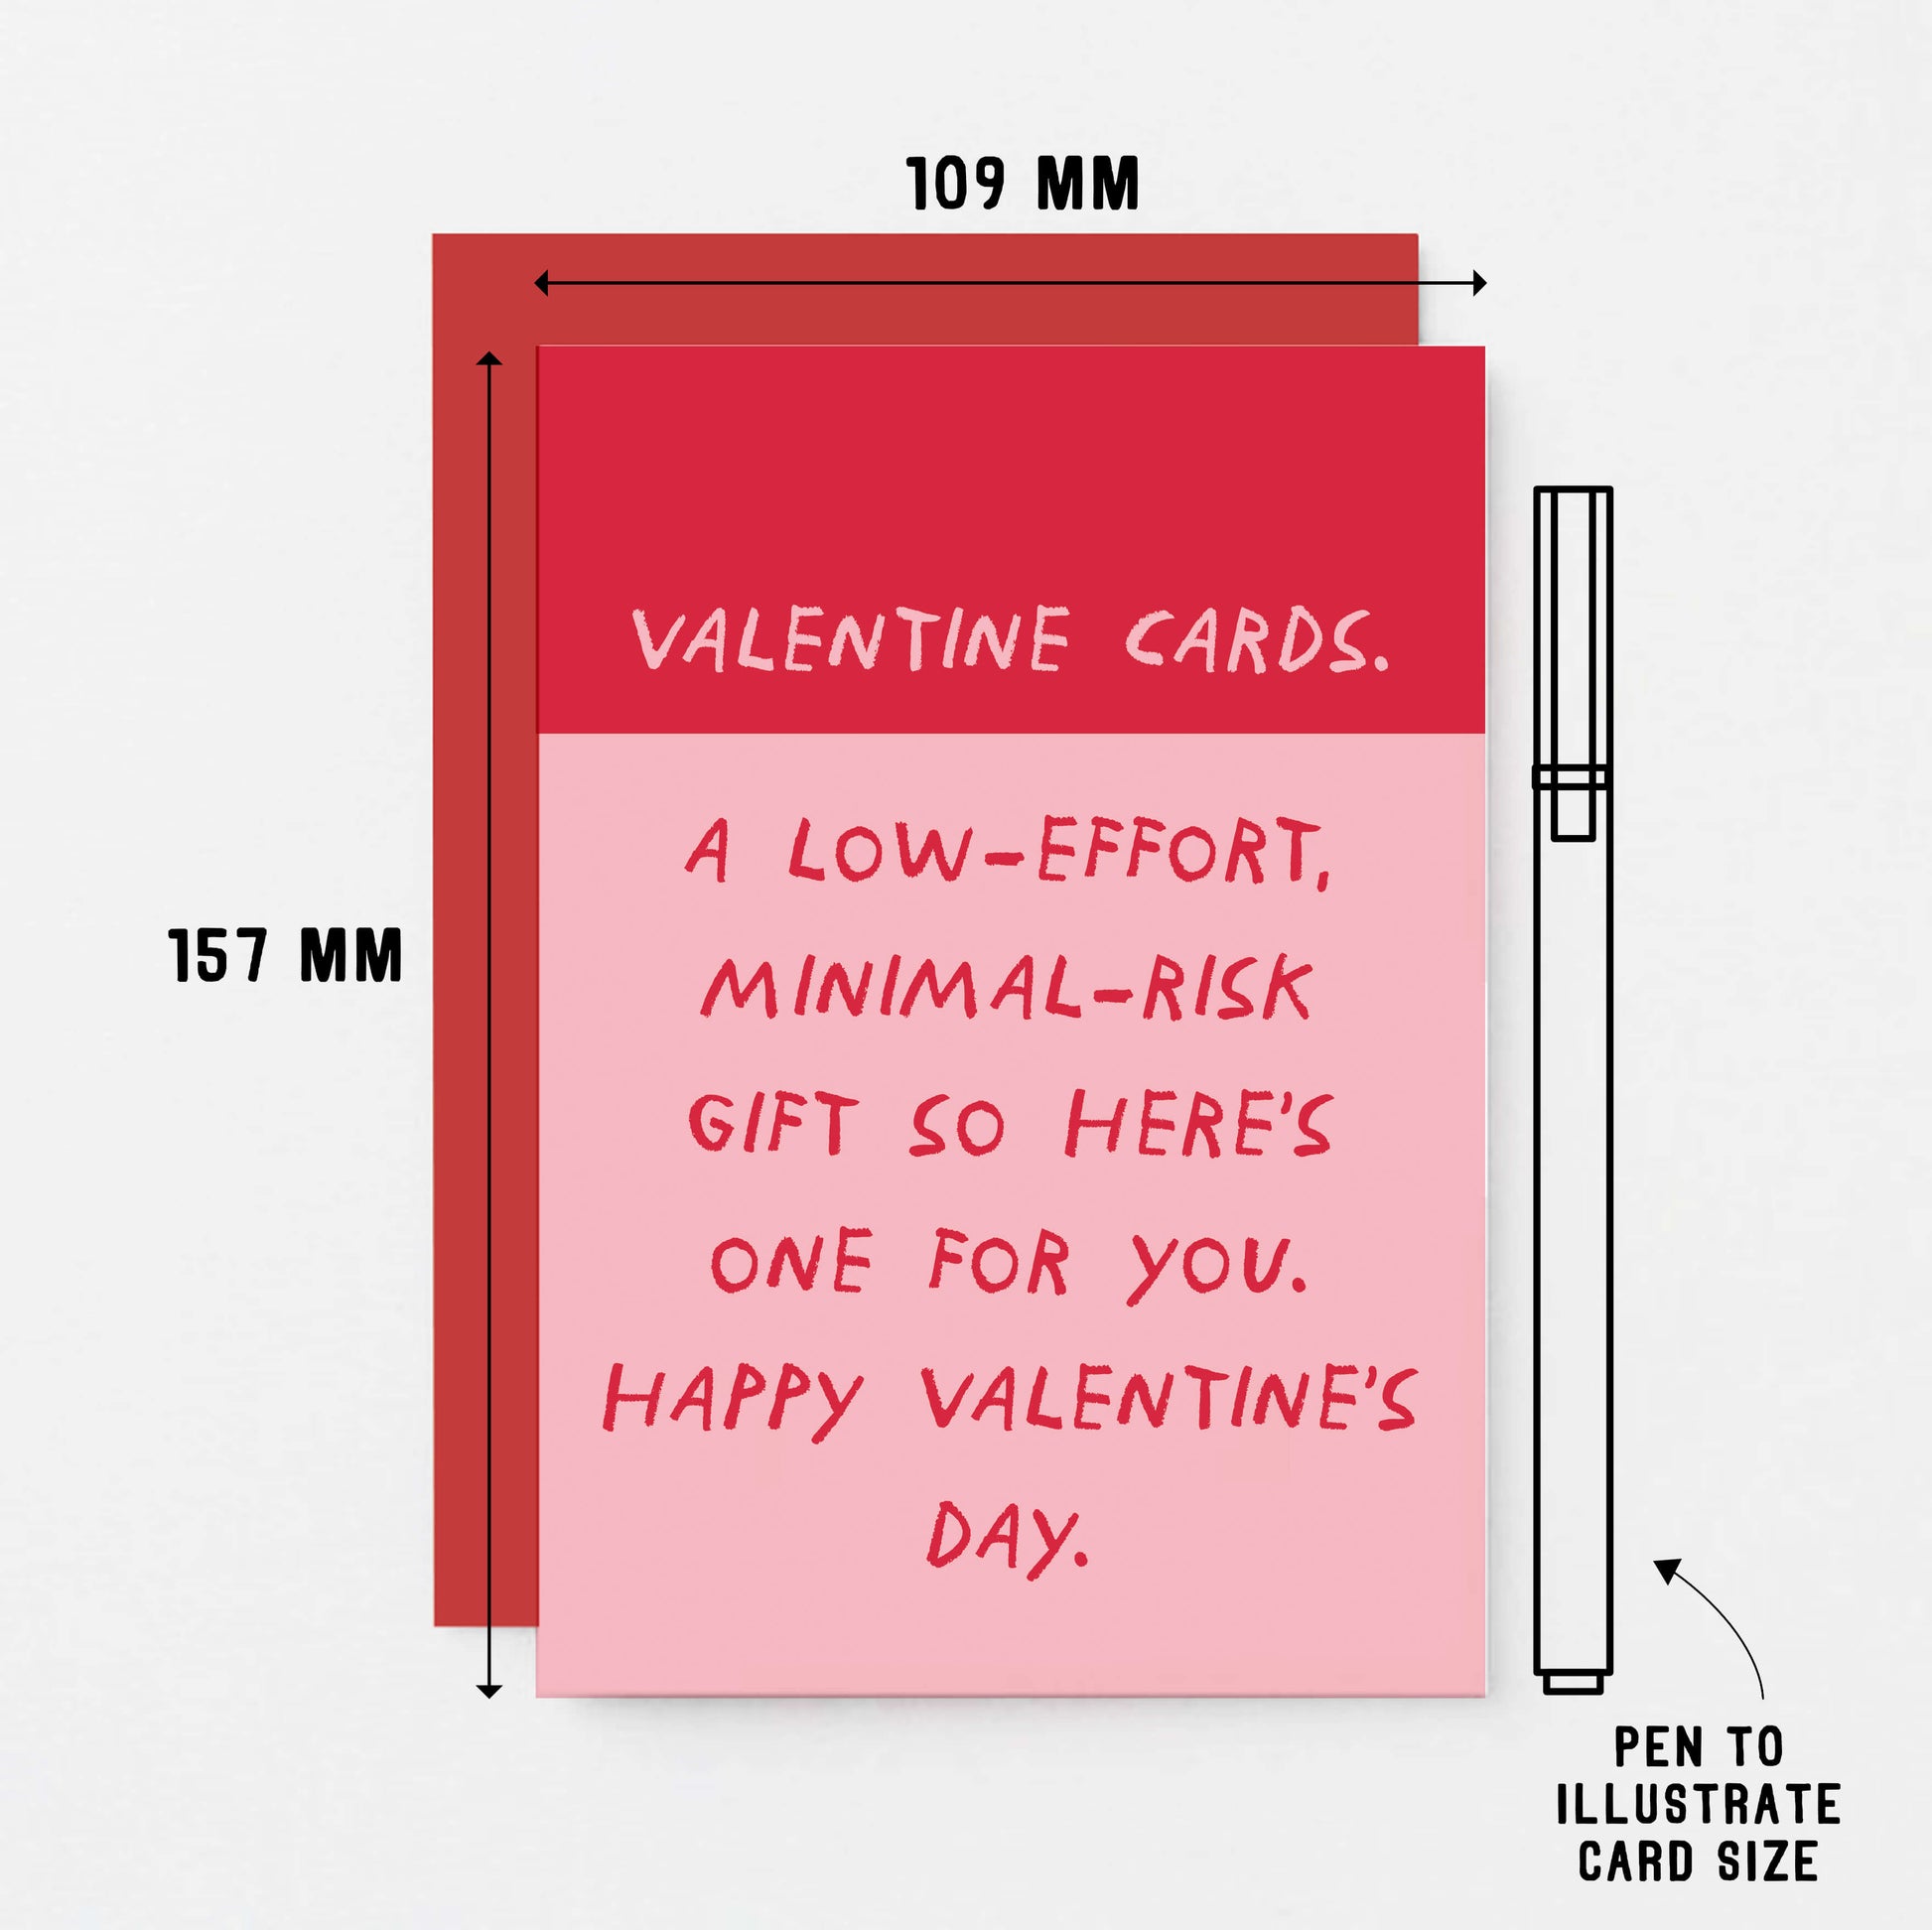 Valentine Card by SixElevenCreations. Card reads Valentine Cards. A low-effort, minimal-risk gift so here's one for you. Happy Valentine's Day. Product Code SEV0071A6.